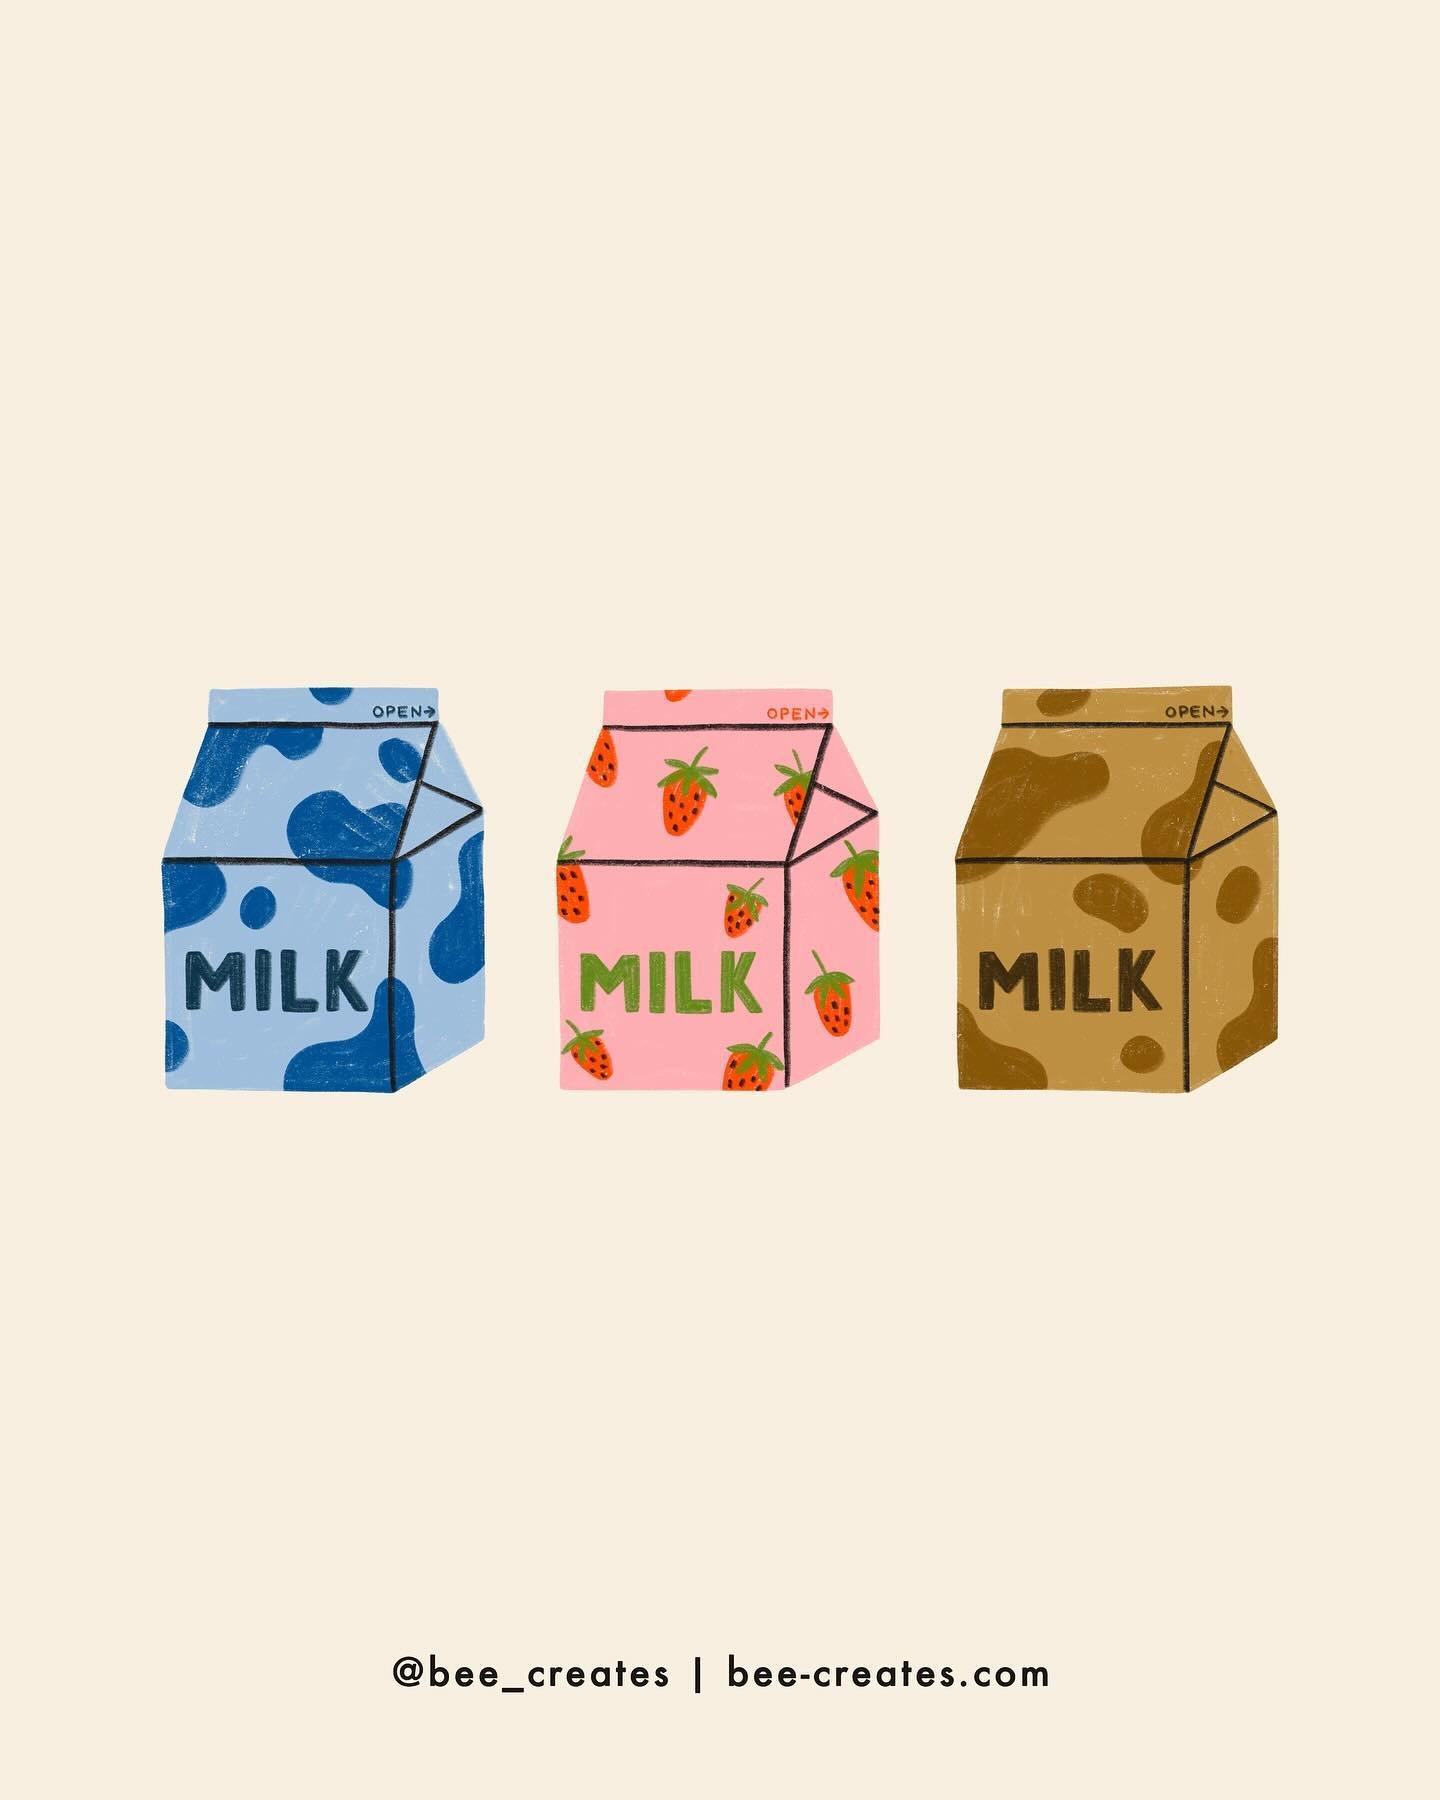 What&rsquo;s your milk of choice? I LOVE milk but I&rsquo;m kinda a purest and am not a fan of strawberry and only occasionally like chocolate.

MILK 13/100 for #100daysoftastyart

#milk #chocolatemilk #strawberrymilk #moo #🥛 #cookiesandmilk #illust